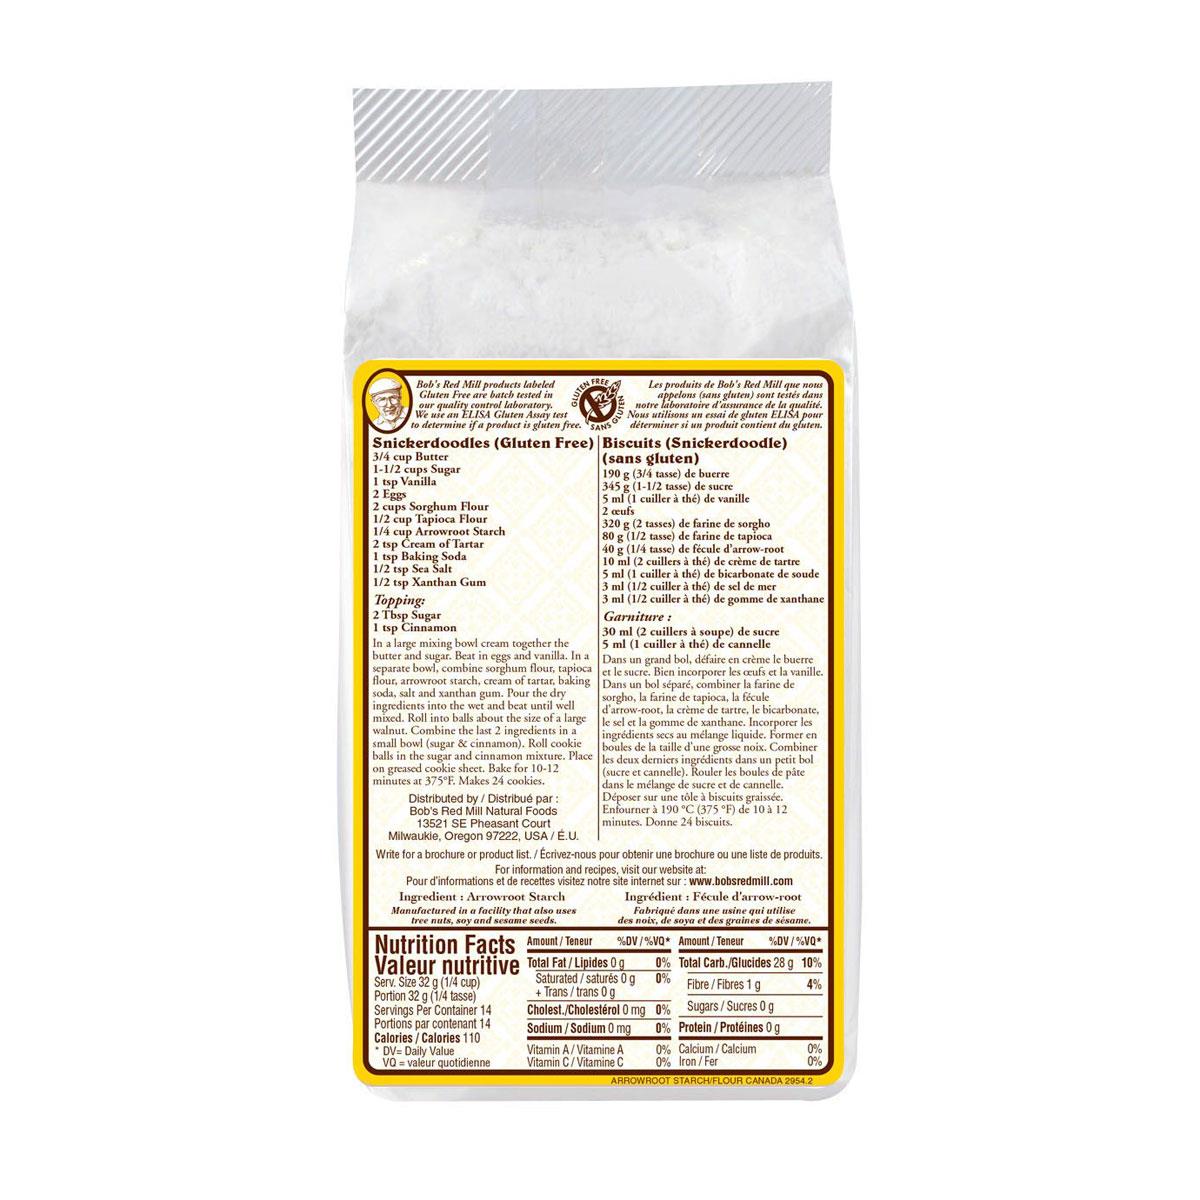 Bob's Red Mill Arrowroot Starch/Flour Nutritional Panel